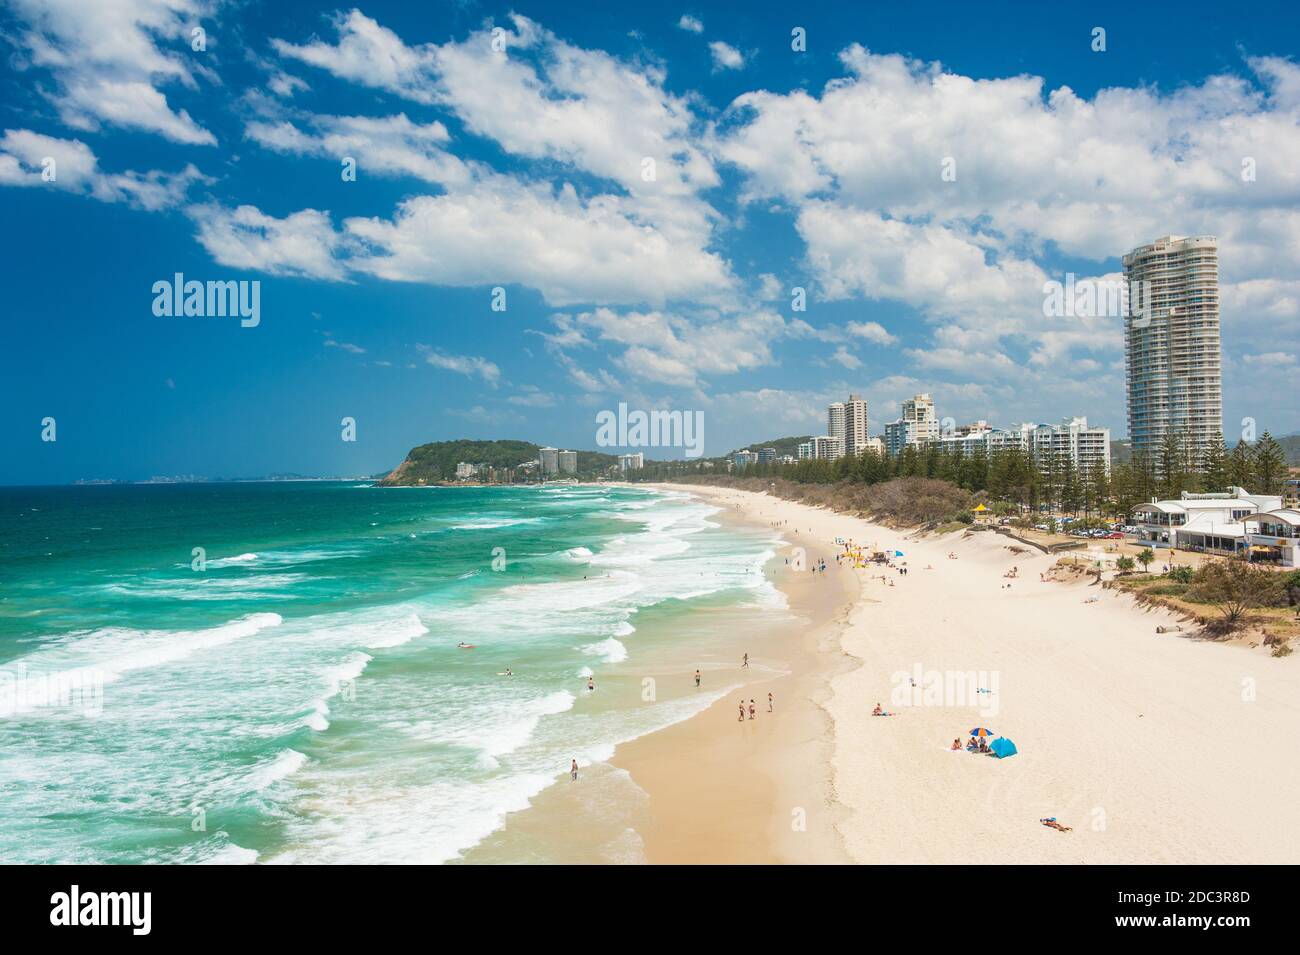 Gold Coast with a beach full of tourists seen from above. Queensland, Australia Stock Photo